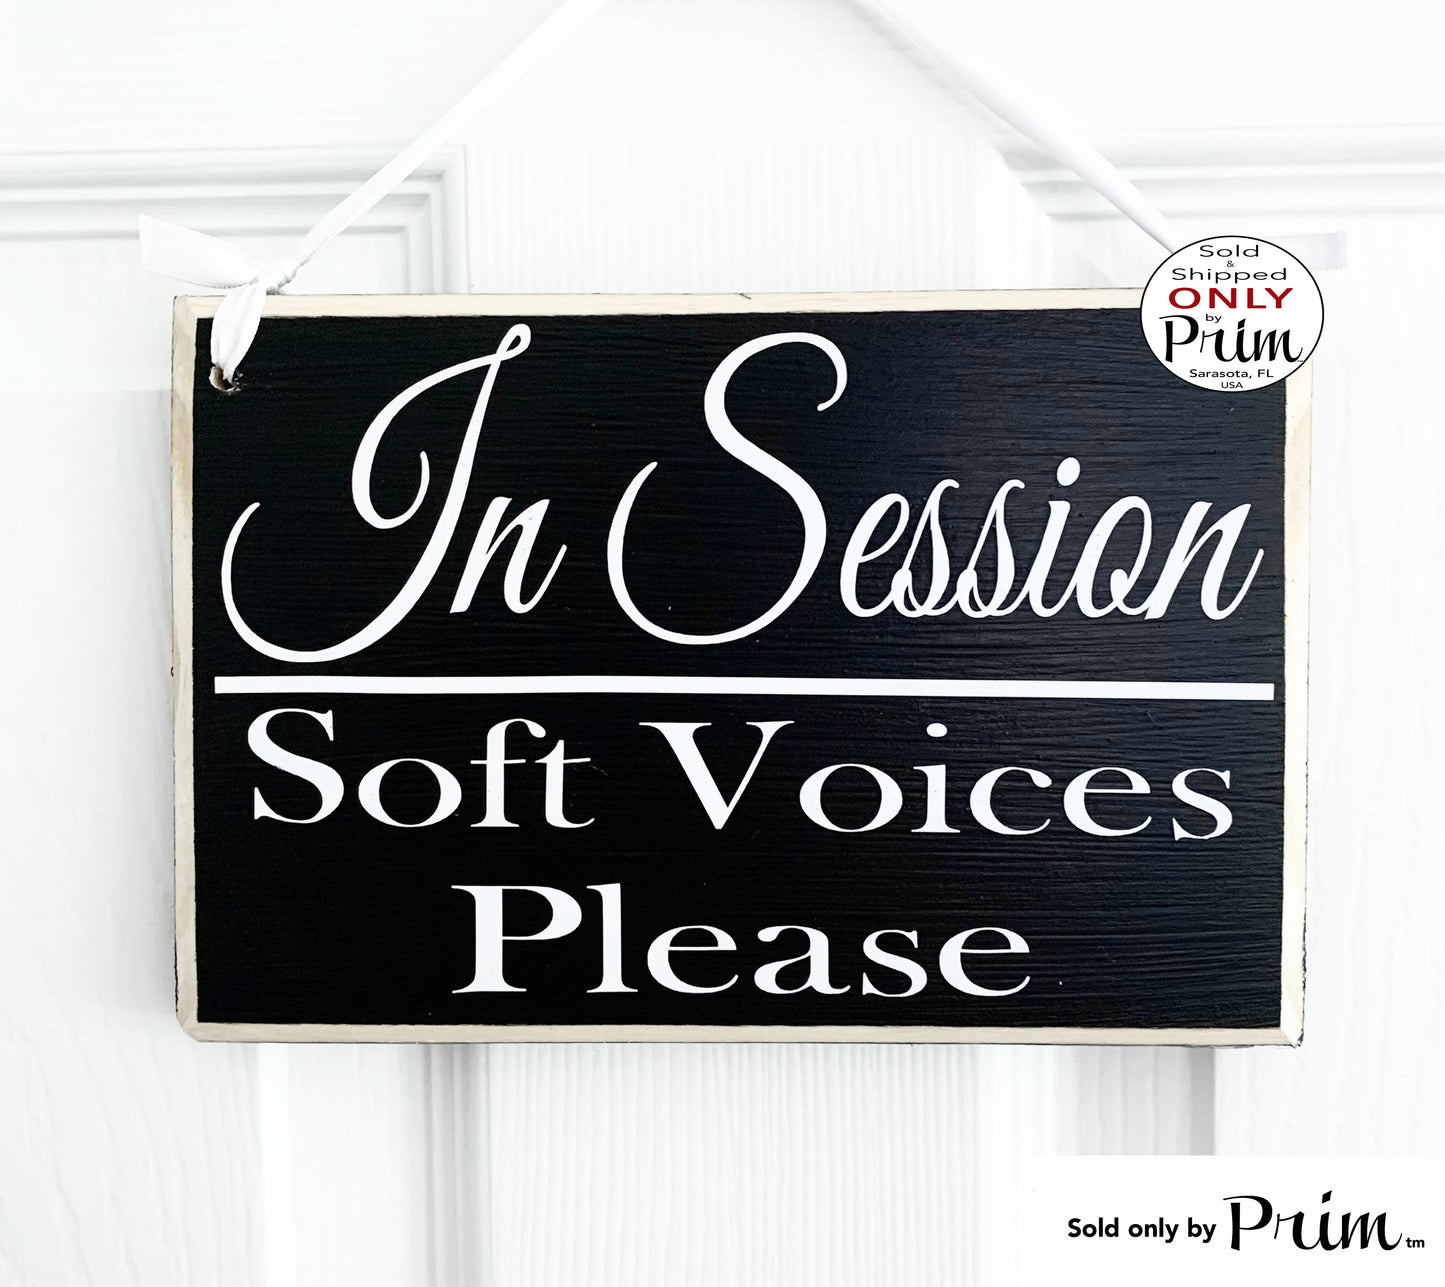 Designs by Prim 8x6 In Session Soft Voices Please Custom Wood Sign Massage Therapy Spa Salon Meditation Yoga Pilates Relaxation Please Do Not Disturb Office